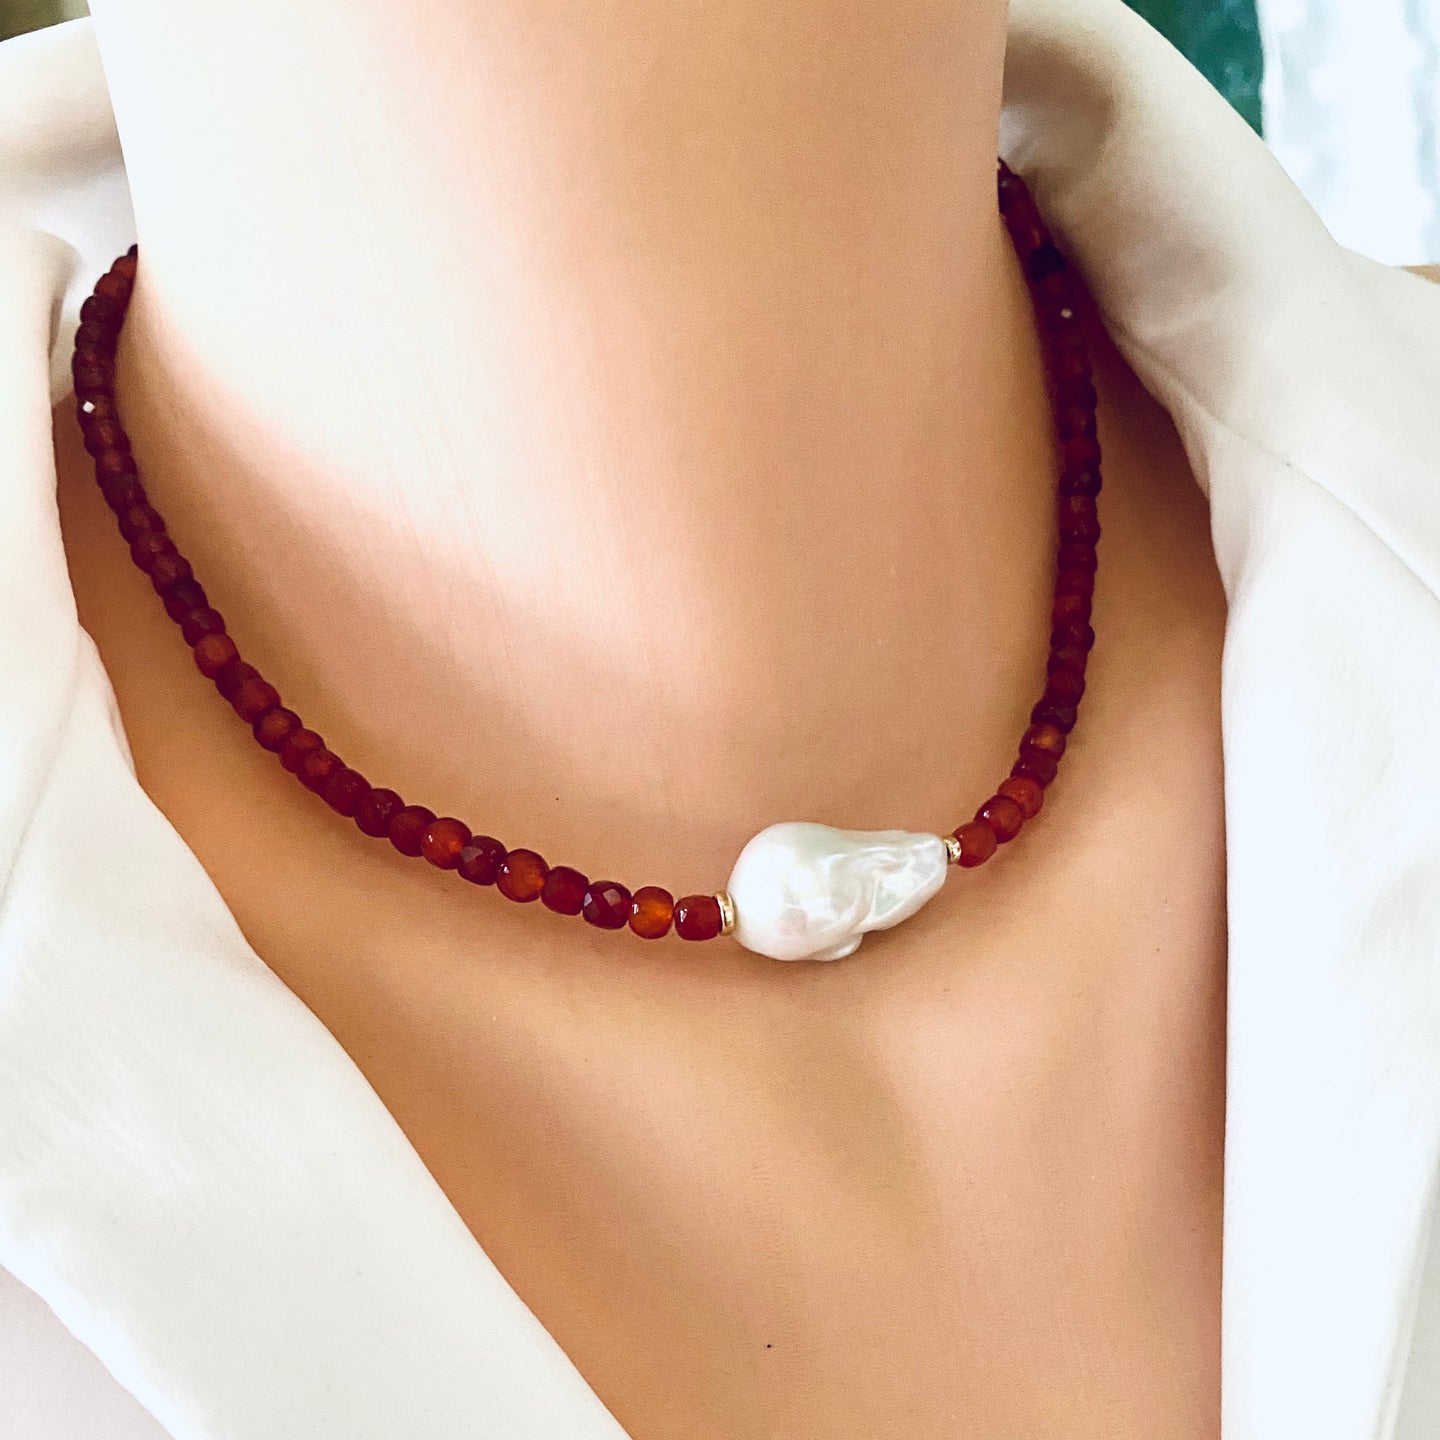 Burnt Orange Carnelian Necklace, Freshwater White Baroque Pearl and Gold Filled Details, 16